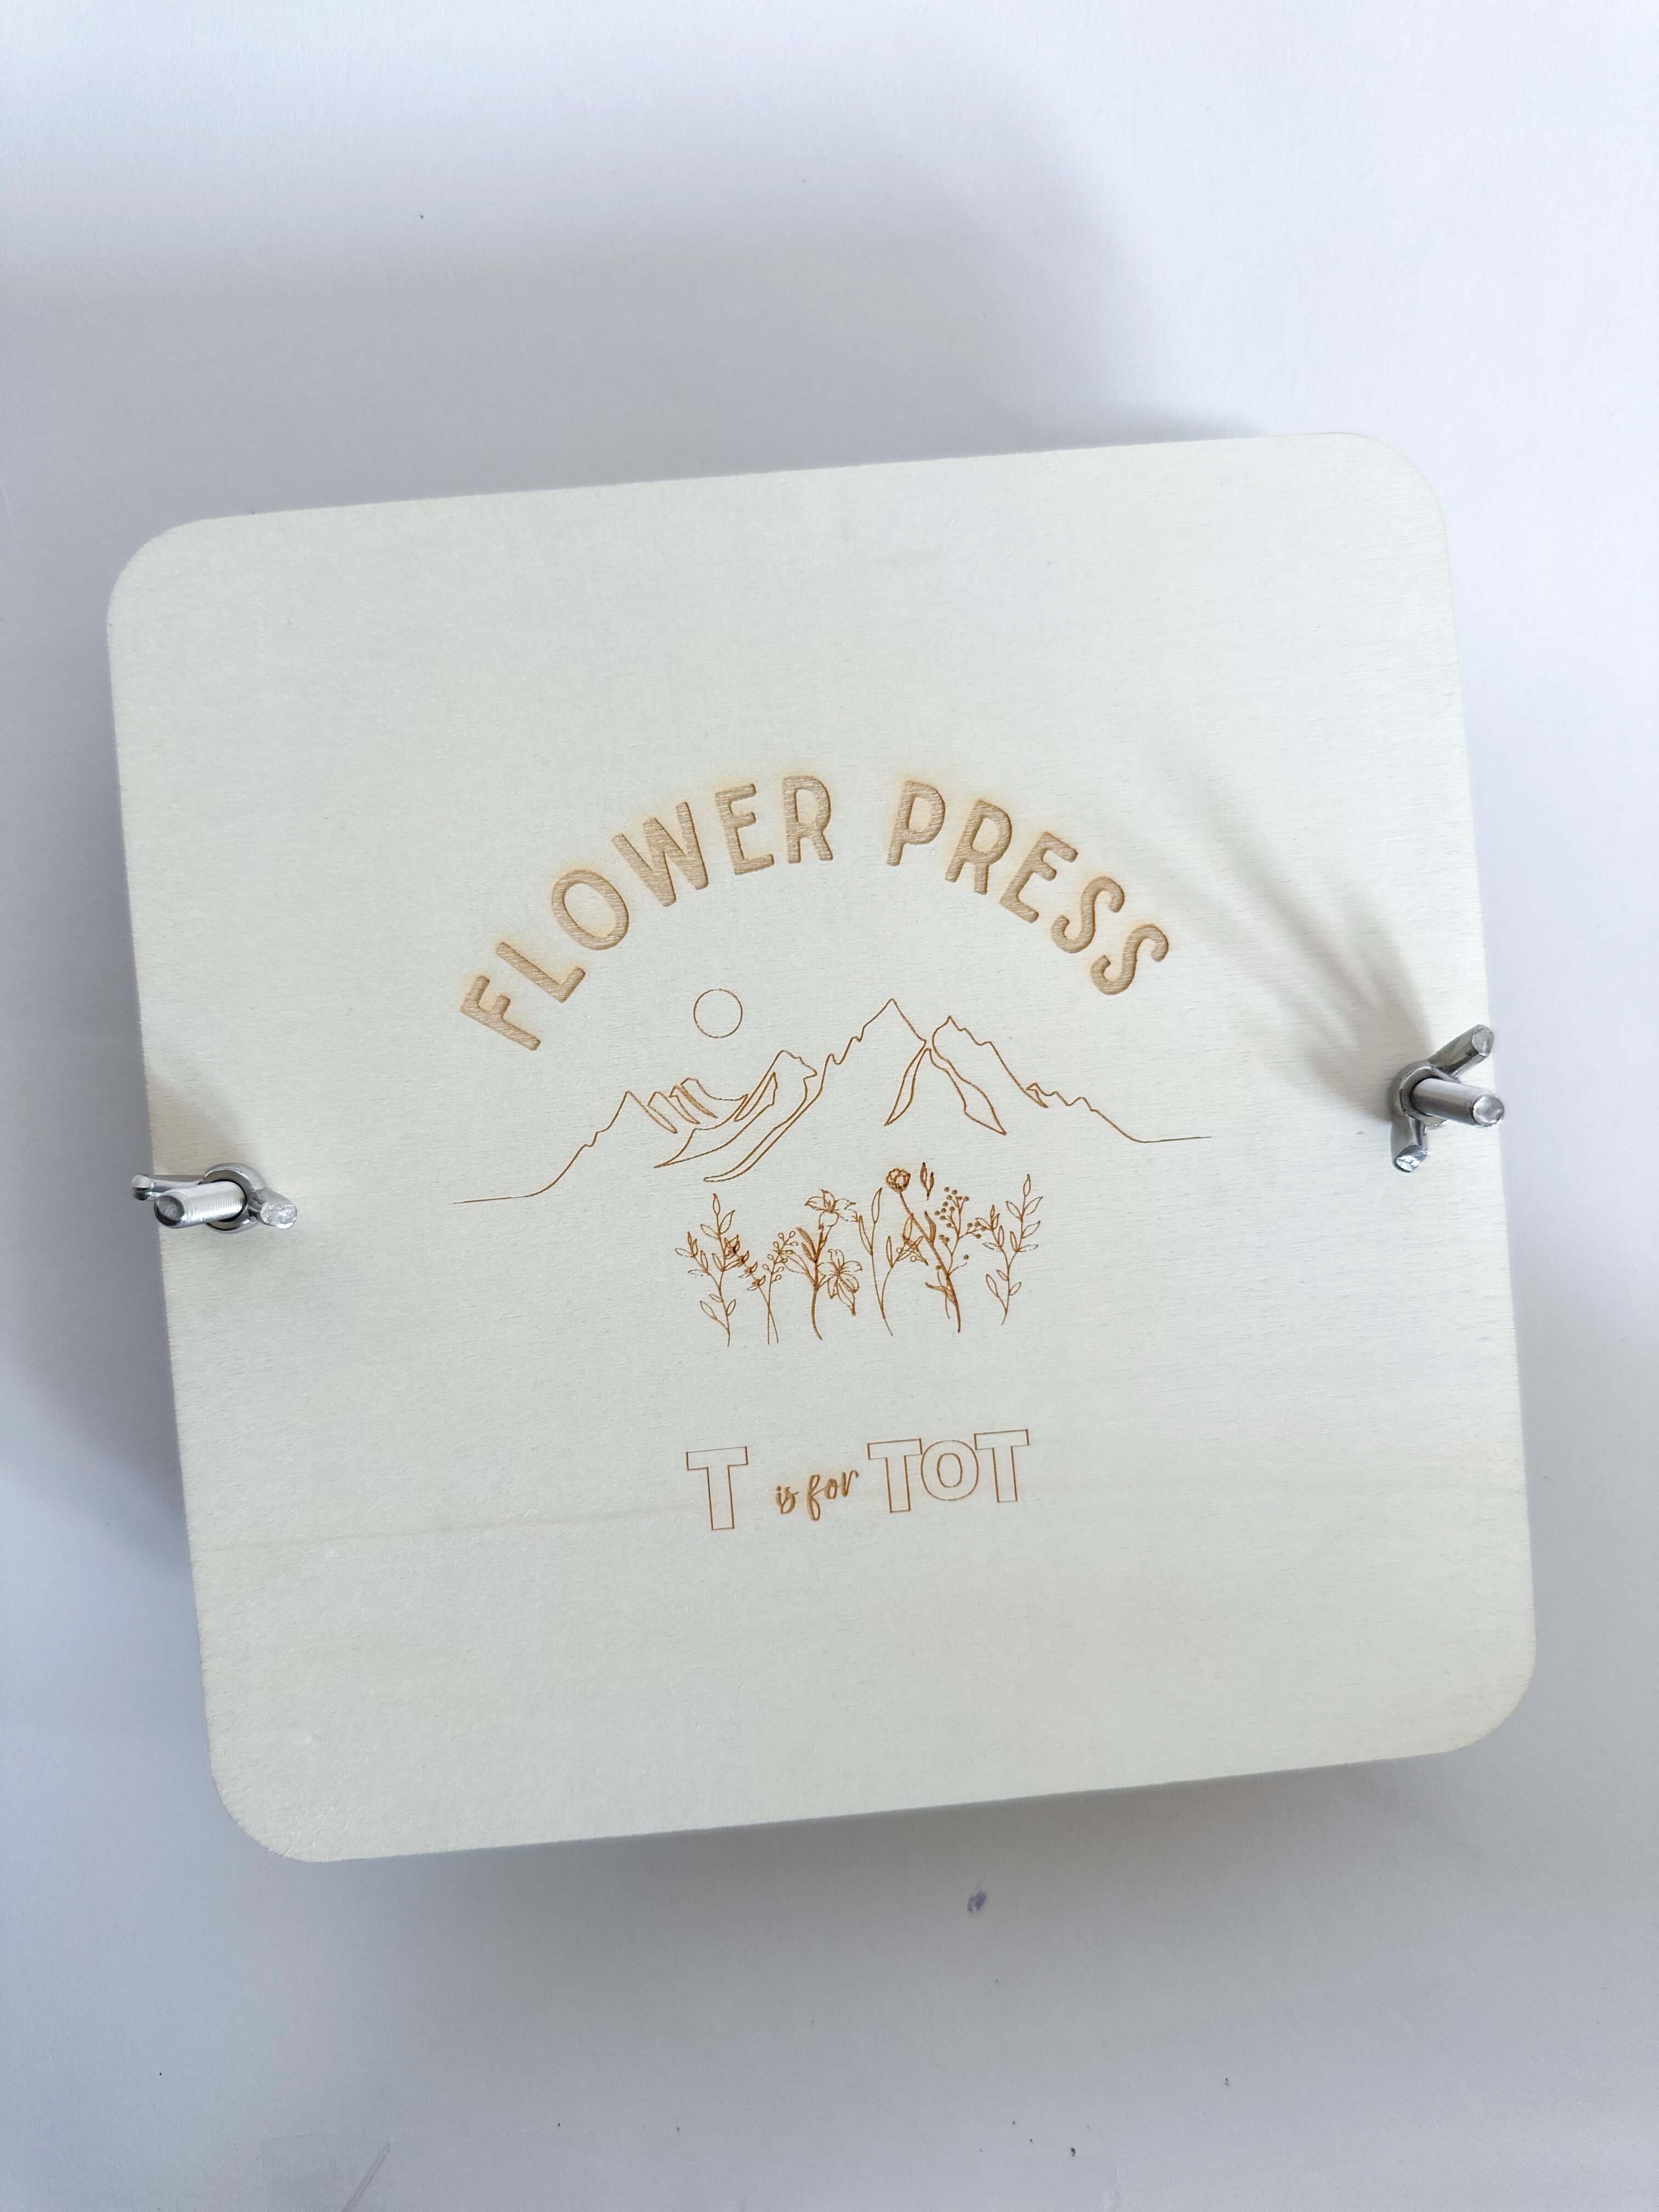 Flower press kit for kids that promotes creative crafting and nature exploration. With this custom-made press, children can press flowers and leaves to create unique art projects. Perfect for play-based learning and outdoor fun.